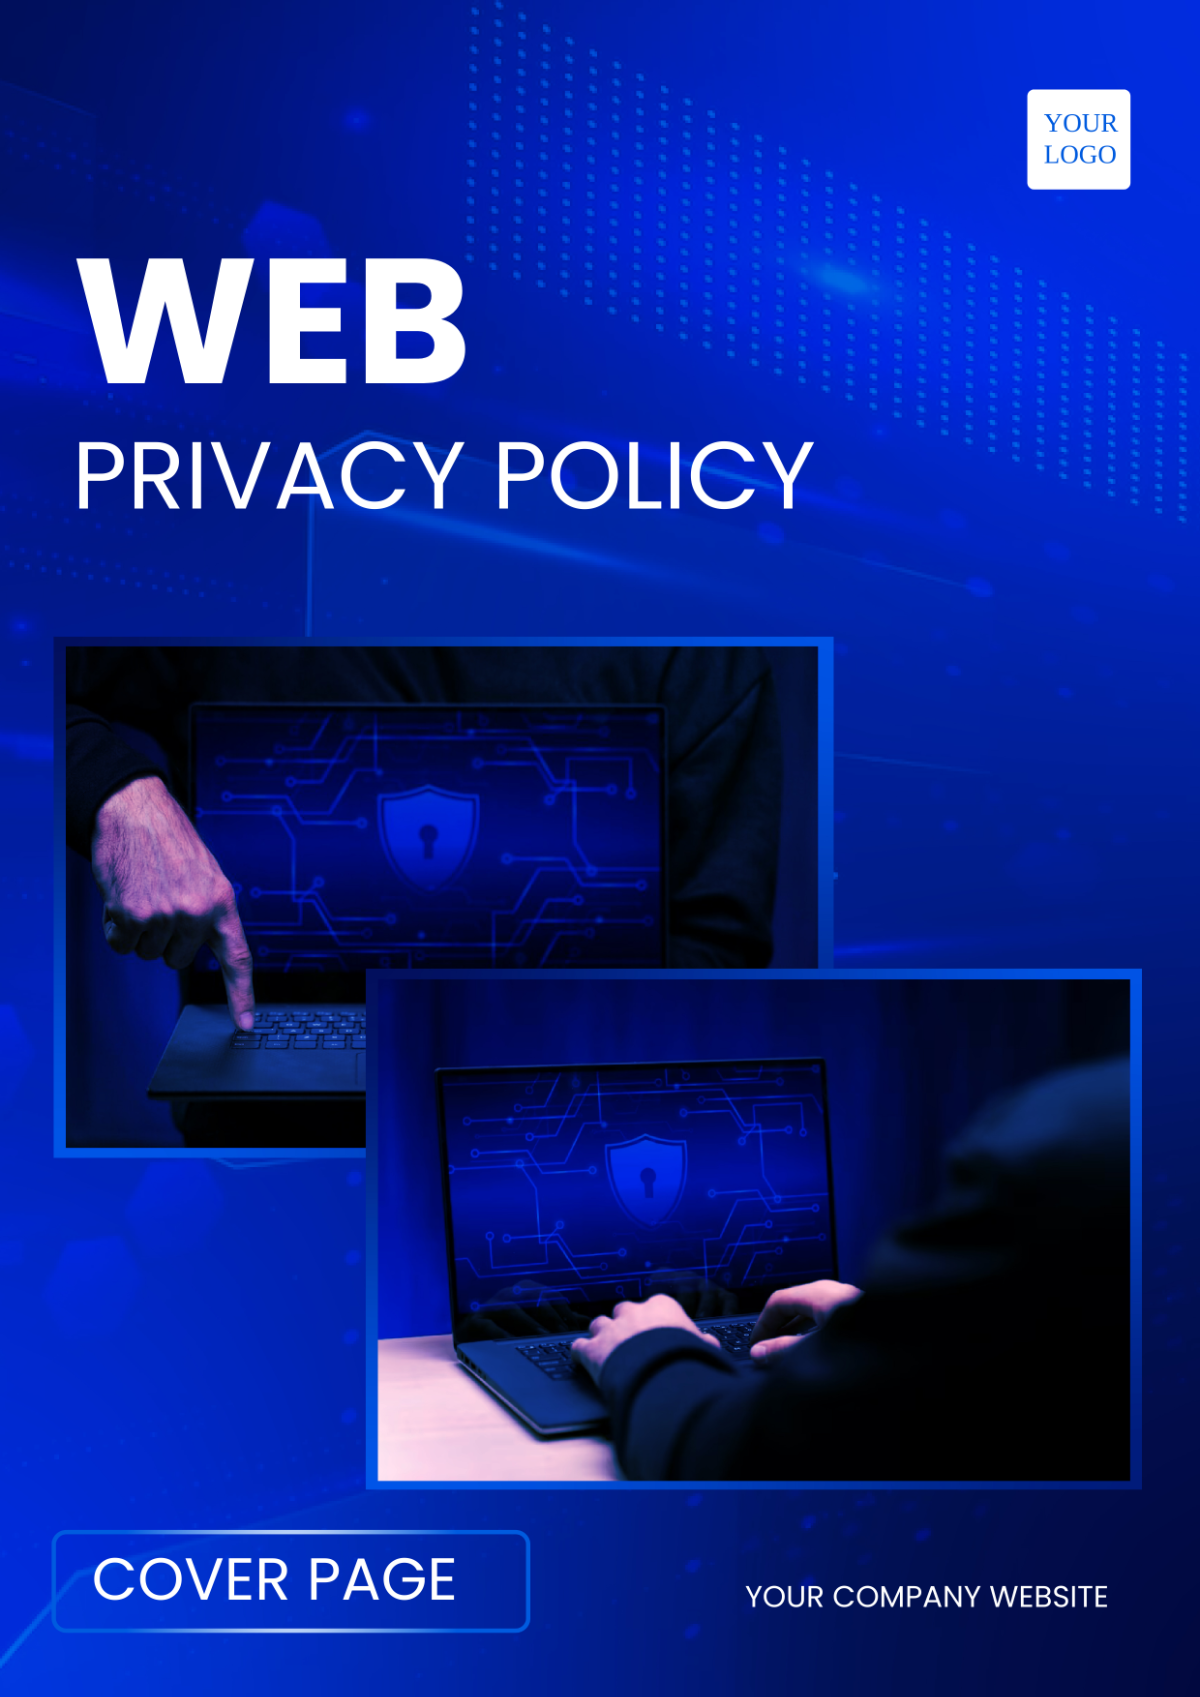 Web Privacy Policy Cover Page